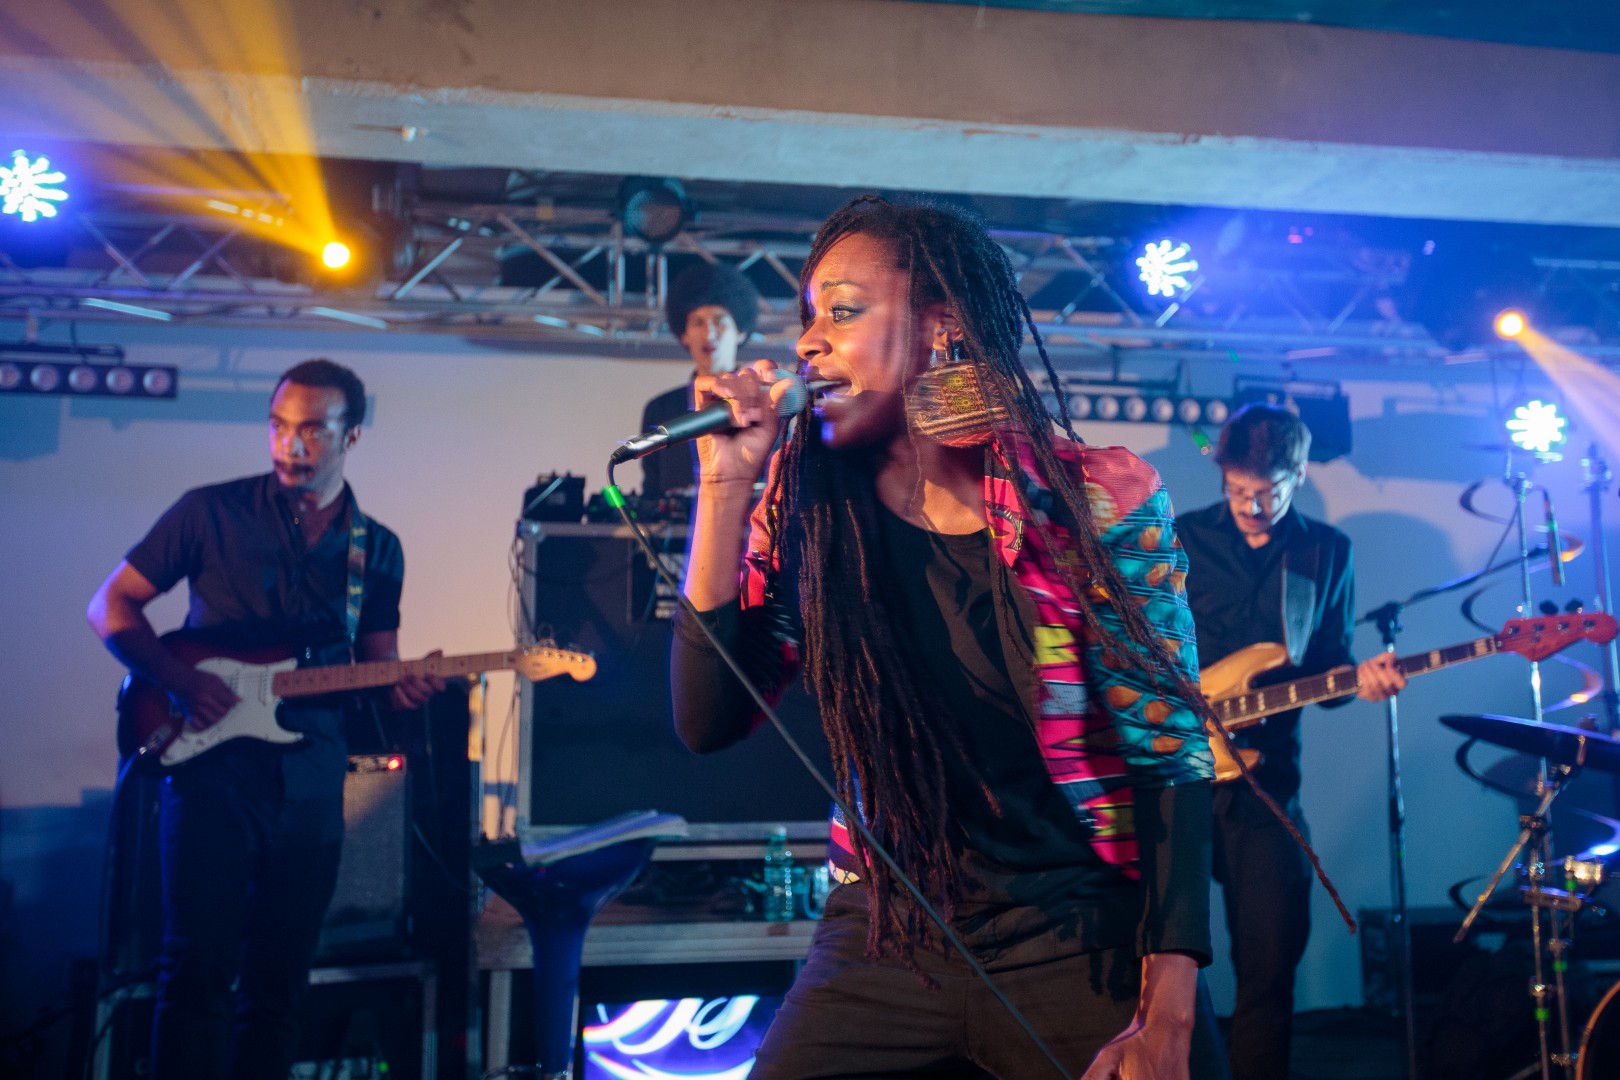 Akua Naru & Digflo Band at Atelierul de Producție in Bucharest on March 29, 2014 (9026d4cfb7)